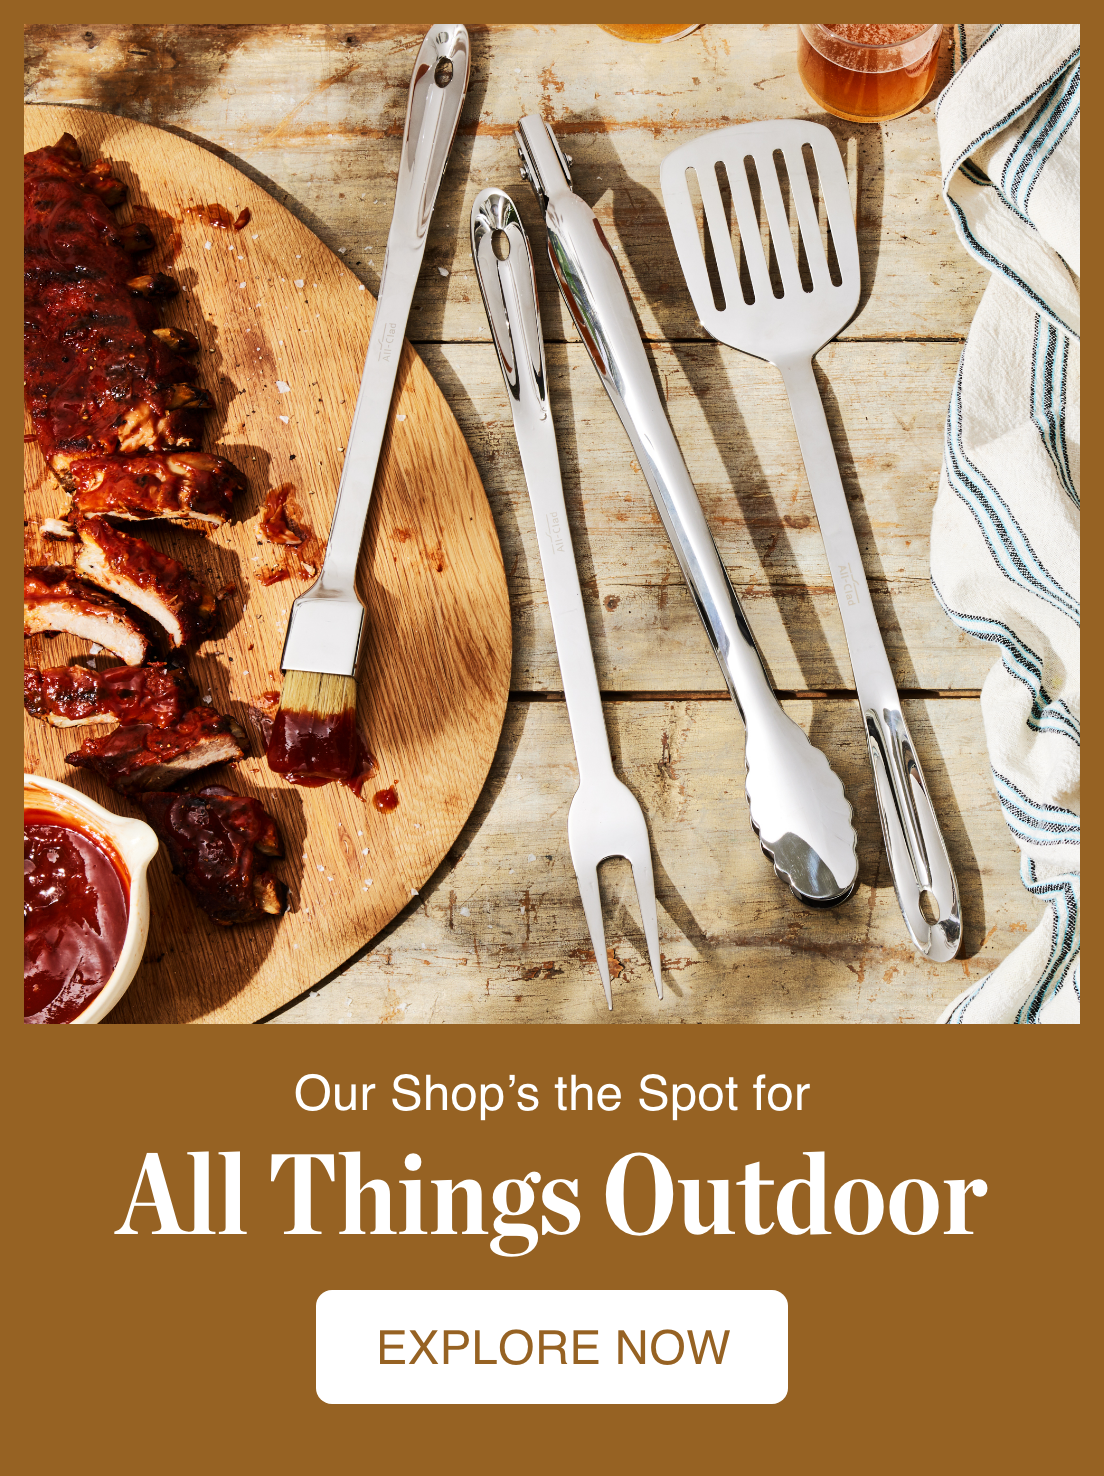 Our Shop's the Spot for All Things Outdoor Explore Now